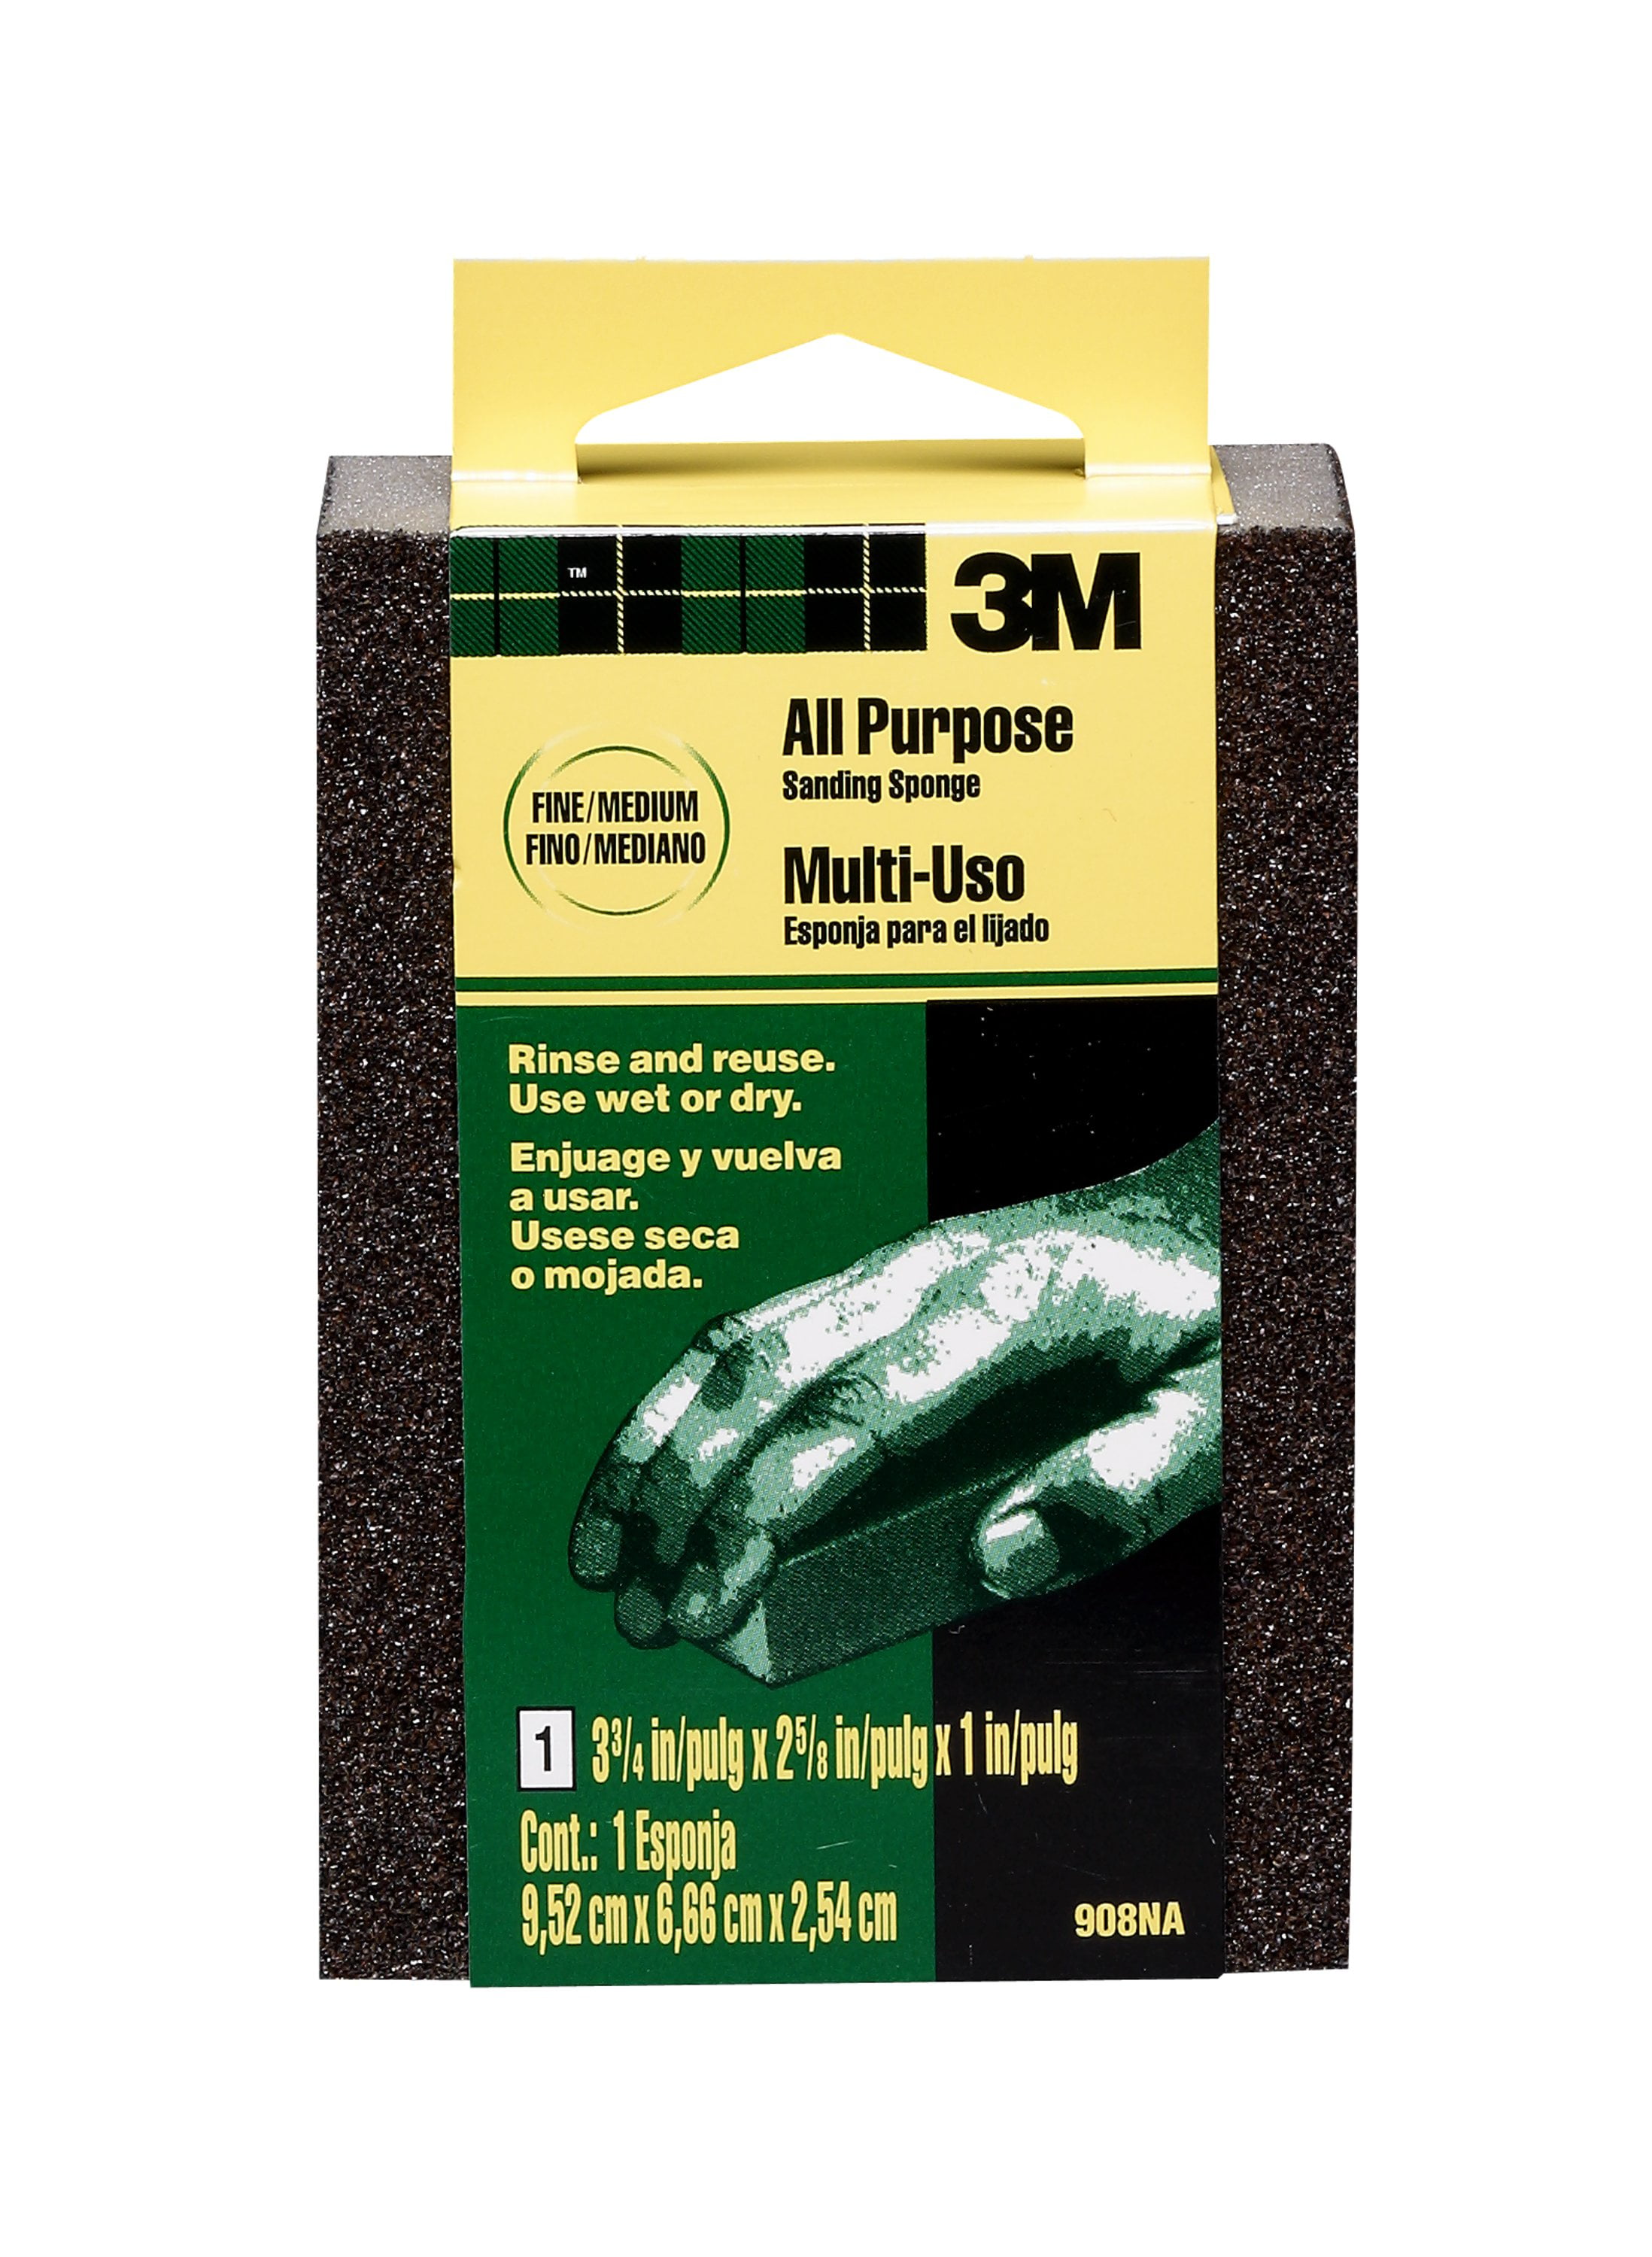 New 3M 908NA Small Area Sanding Sponge Fine/Medium 3.75in by 2.625in by 1in 